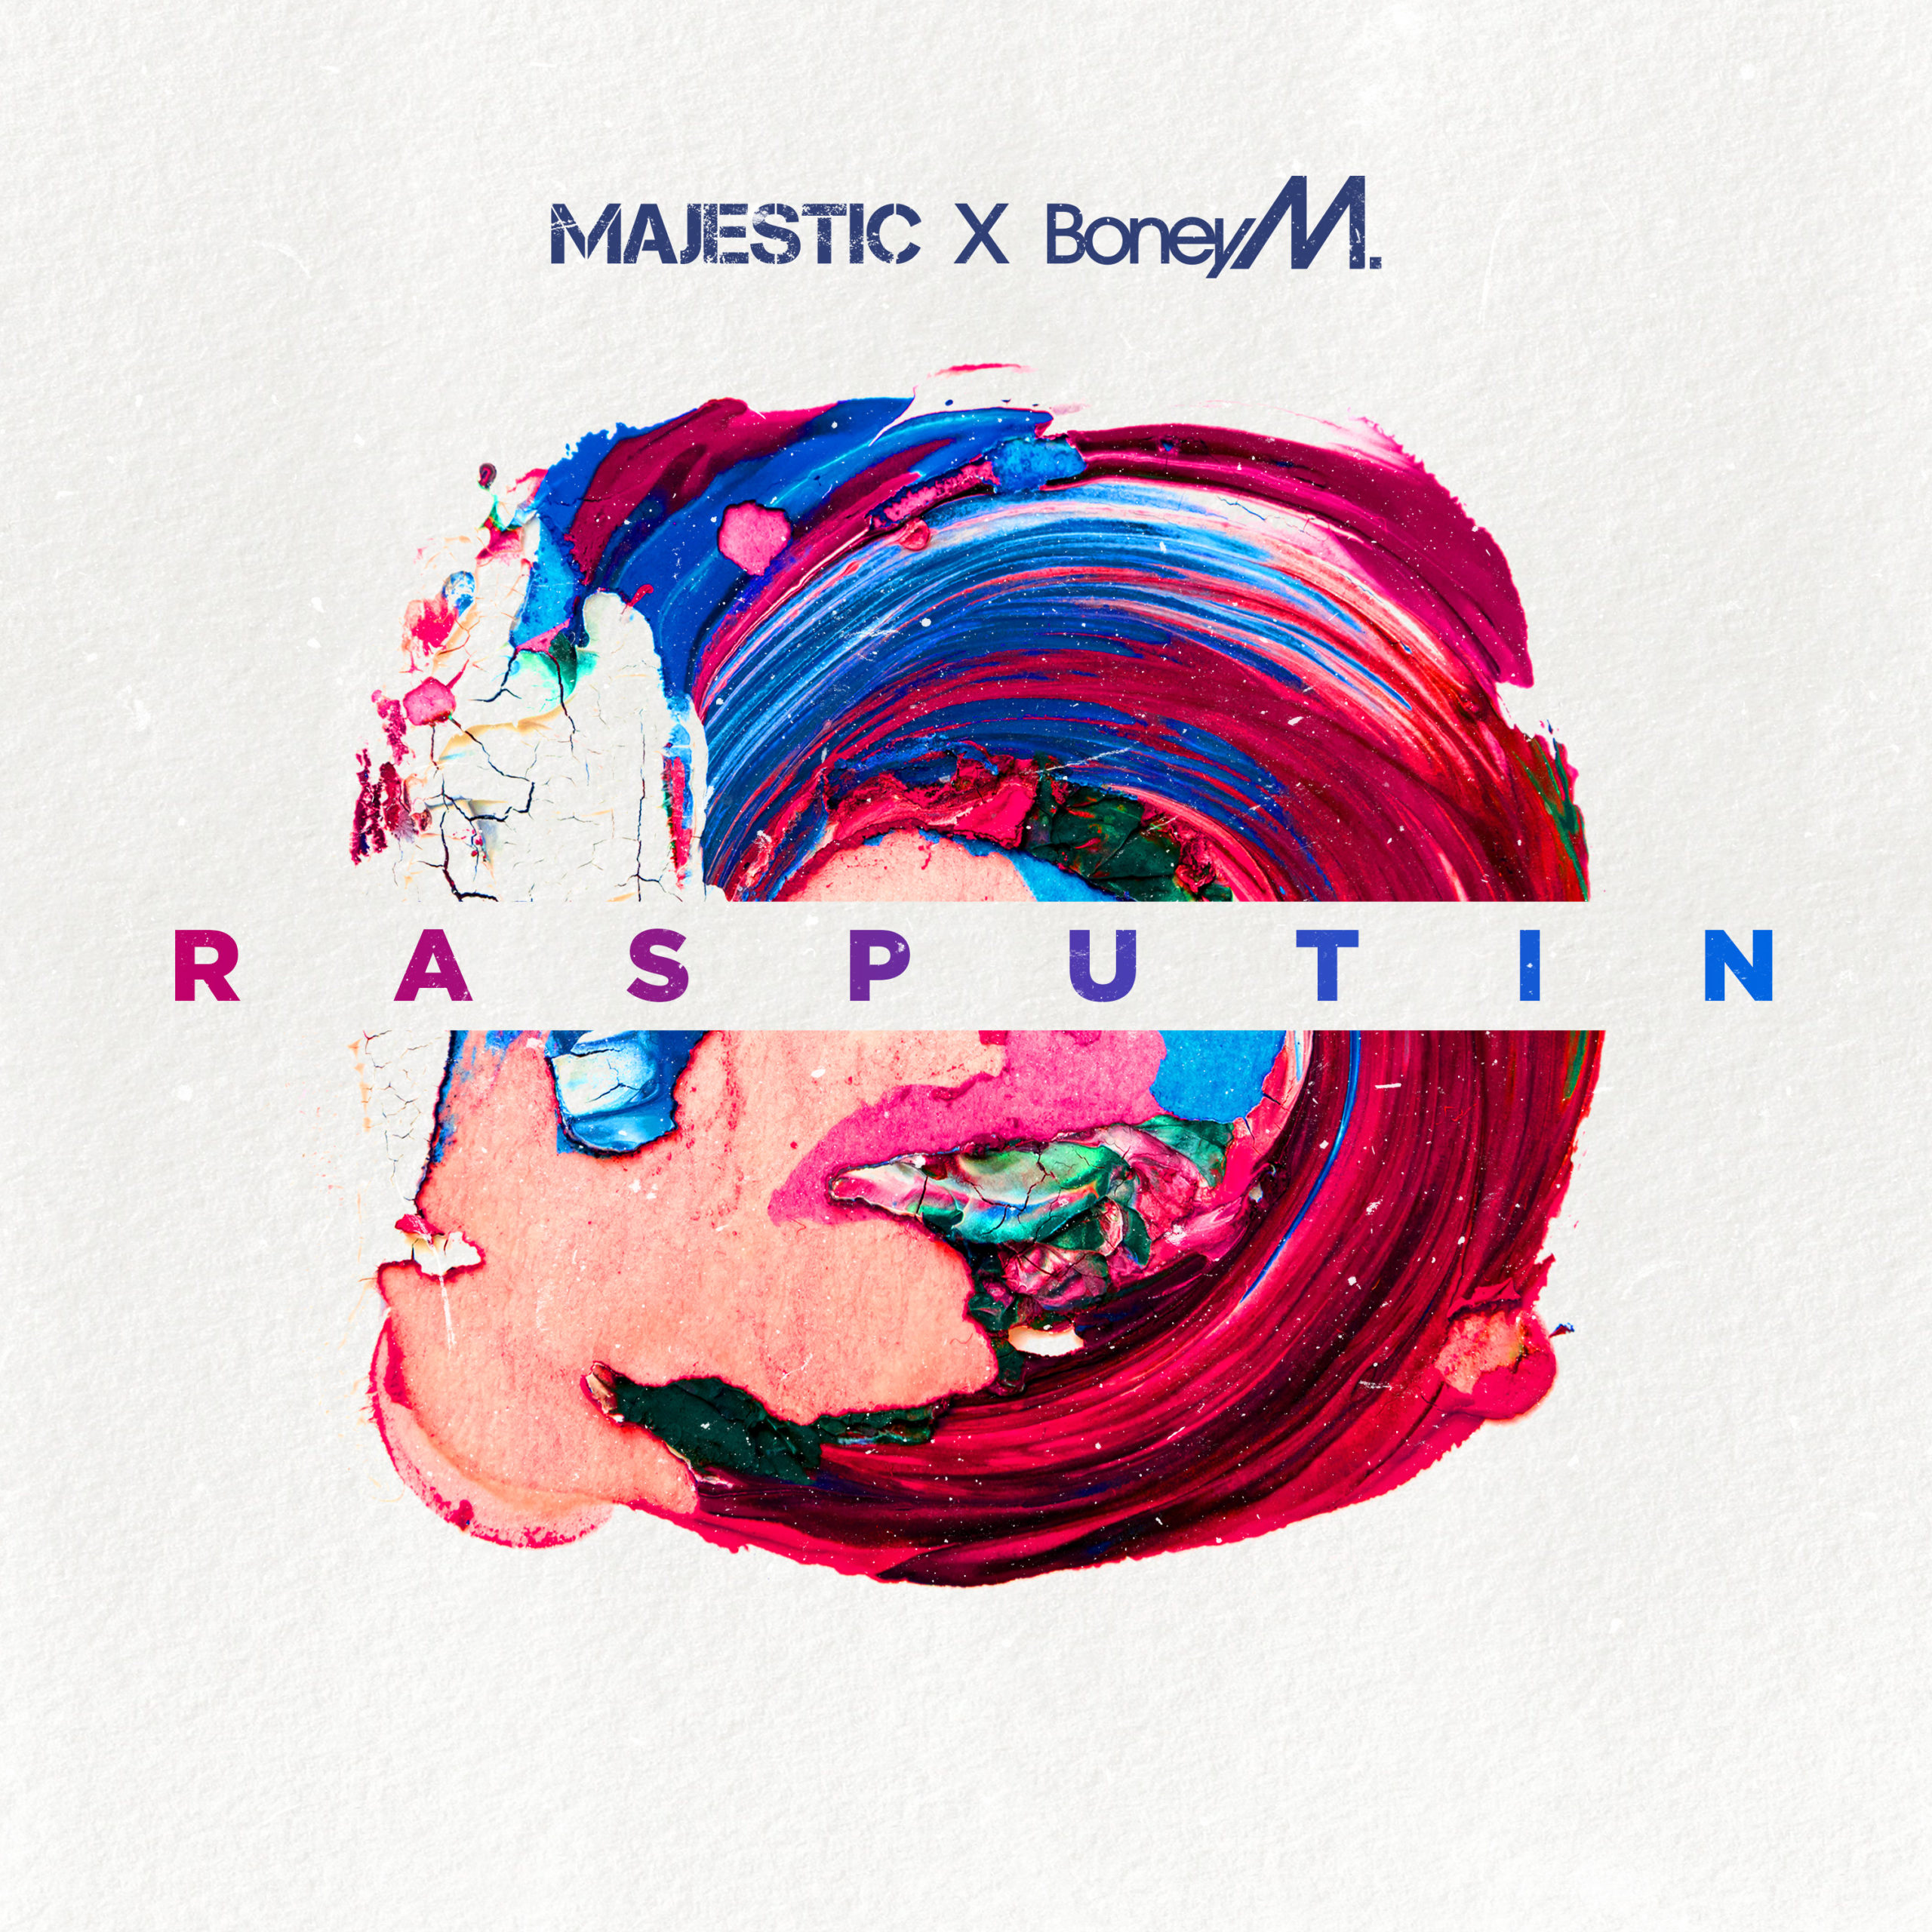 Majestic And Boney M S Rasputin Official Video Out Now